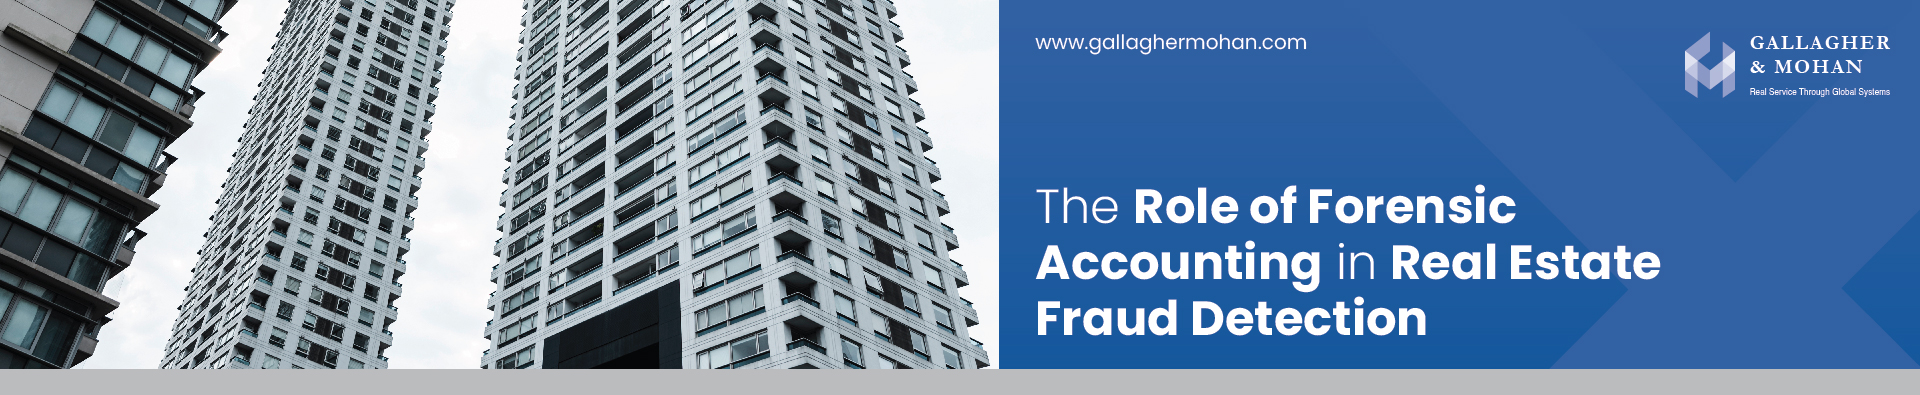 The Role Of Forensic Accounting In Real Estate Fraud Detection